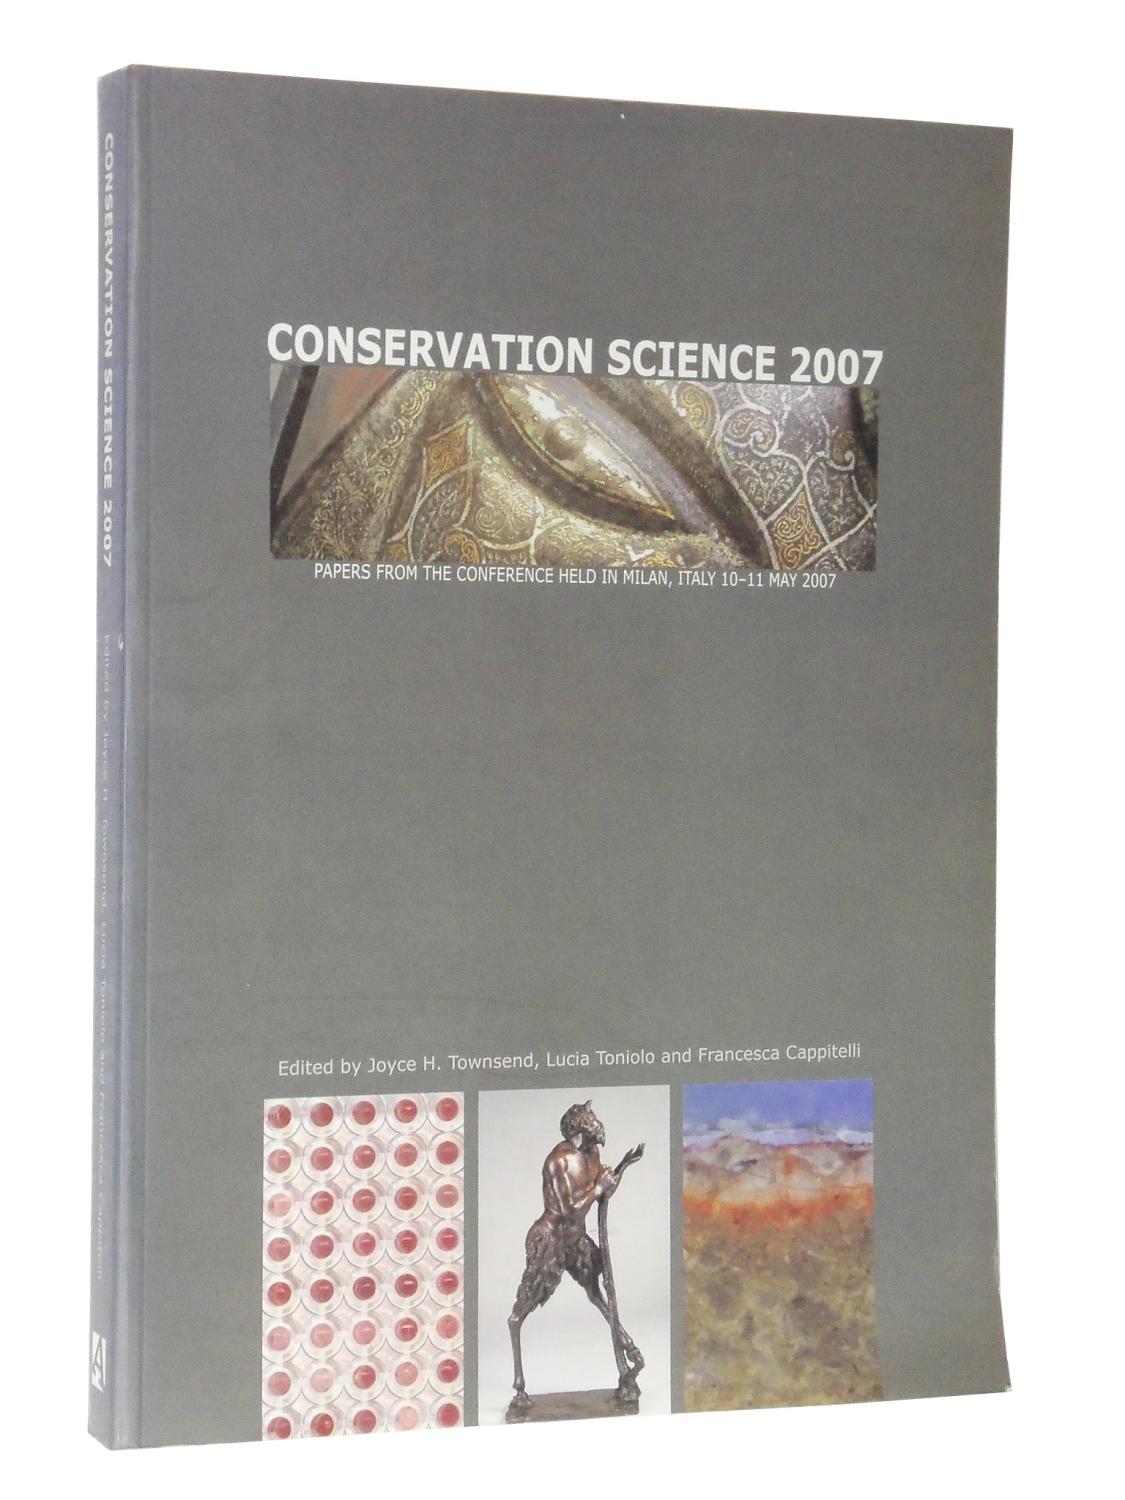 Conservation Science 2007: Papers from the Conference Held in Milan, Italy, 10-11 May, 2007 - Townsend, Joyce H.; Toniolo, Lucia; Cappitelli, Francesca (Edited by)